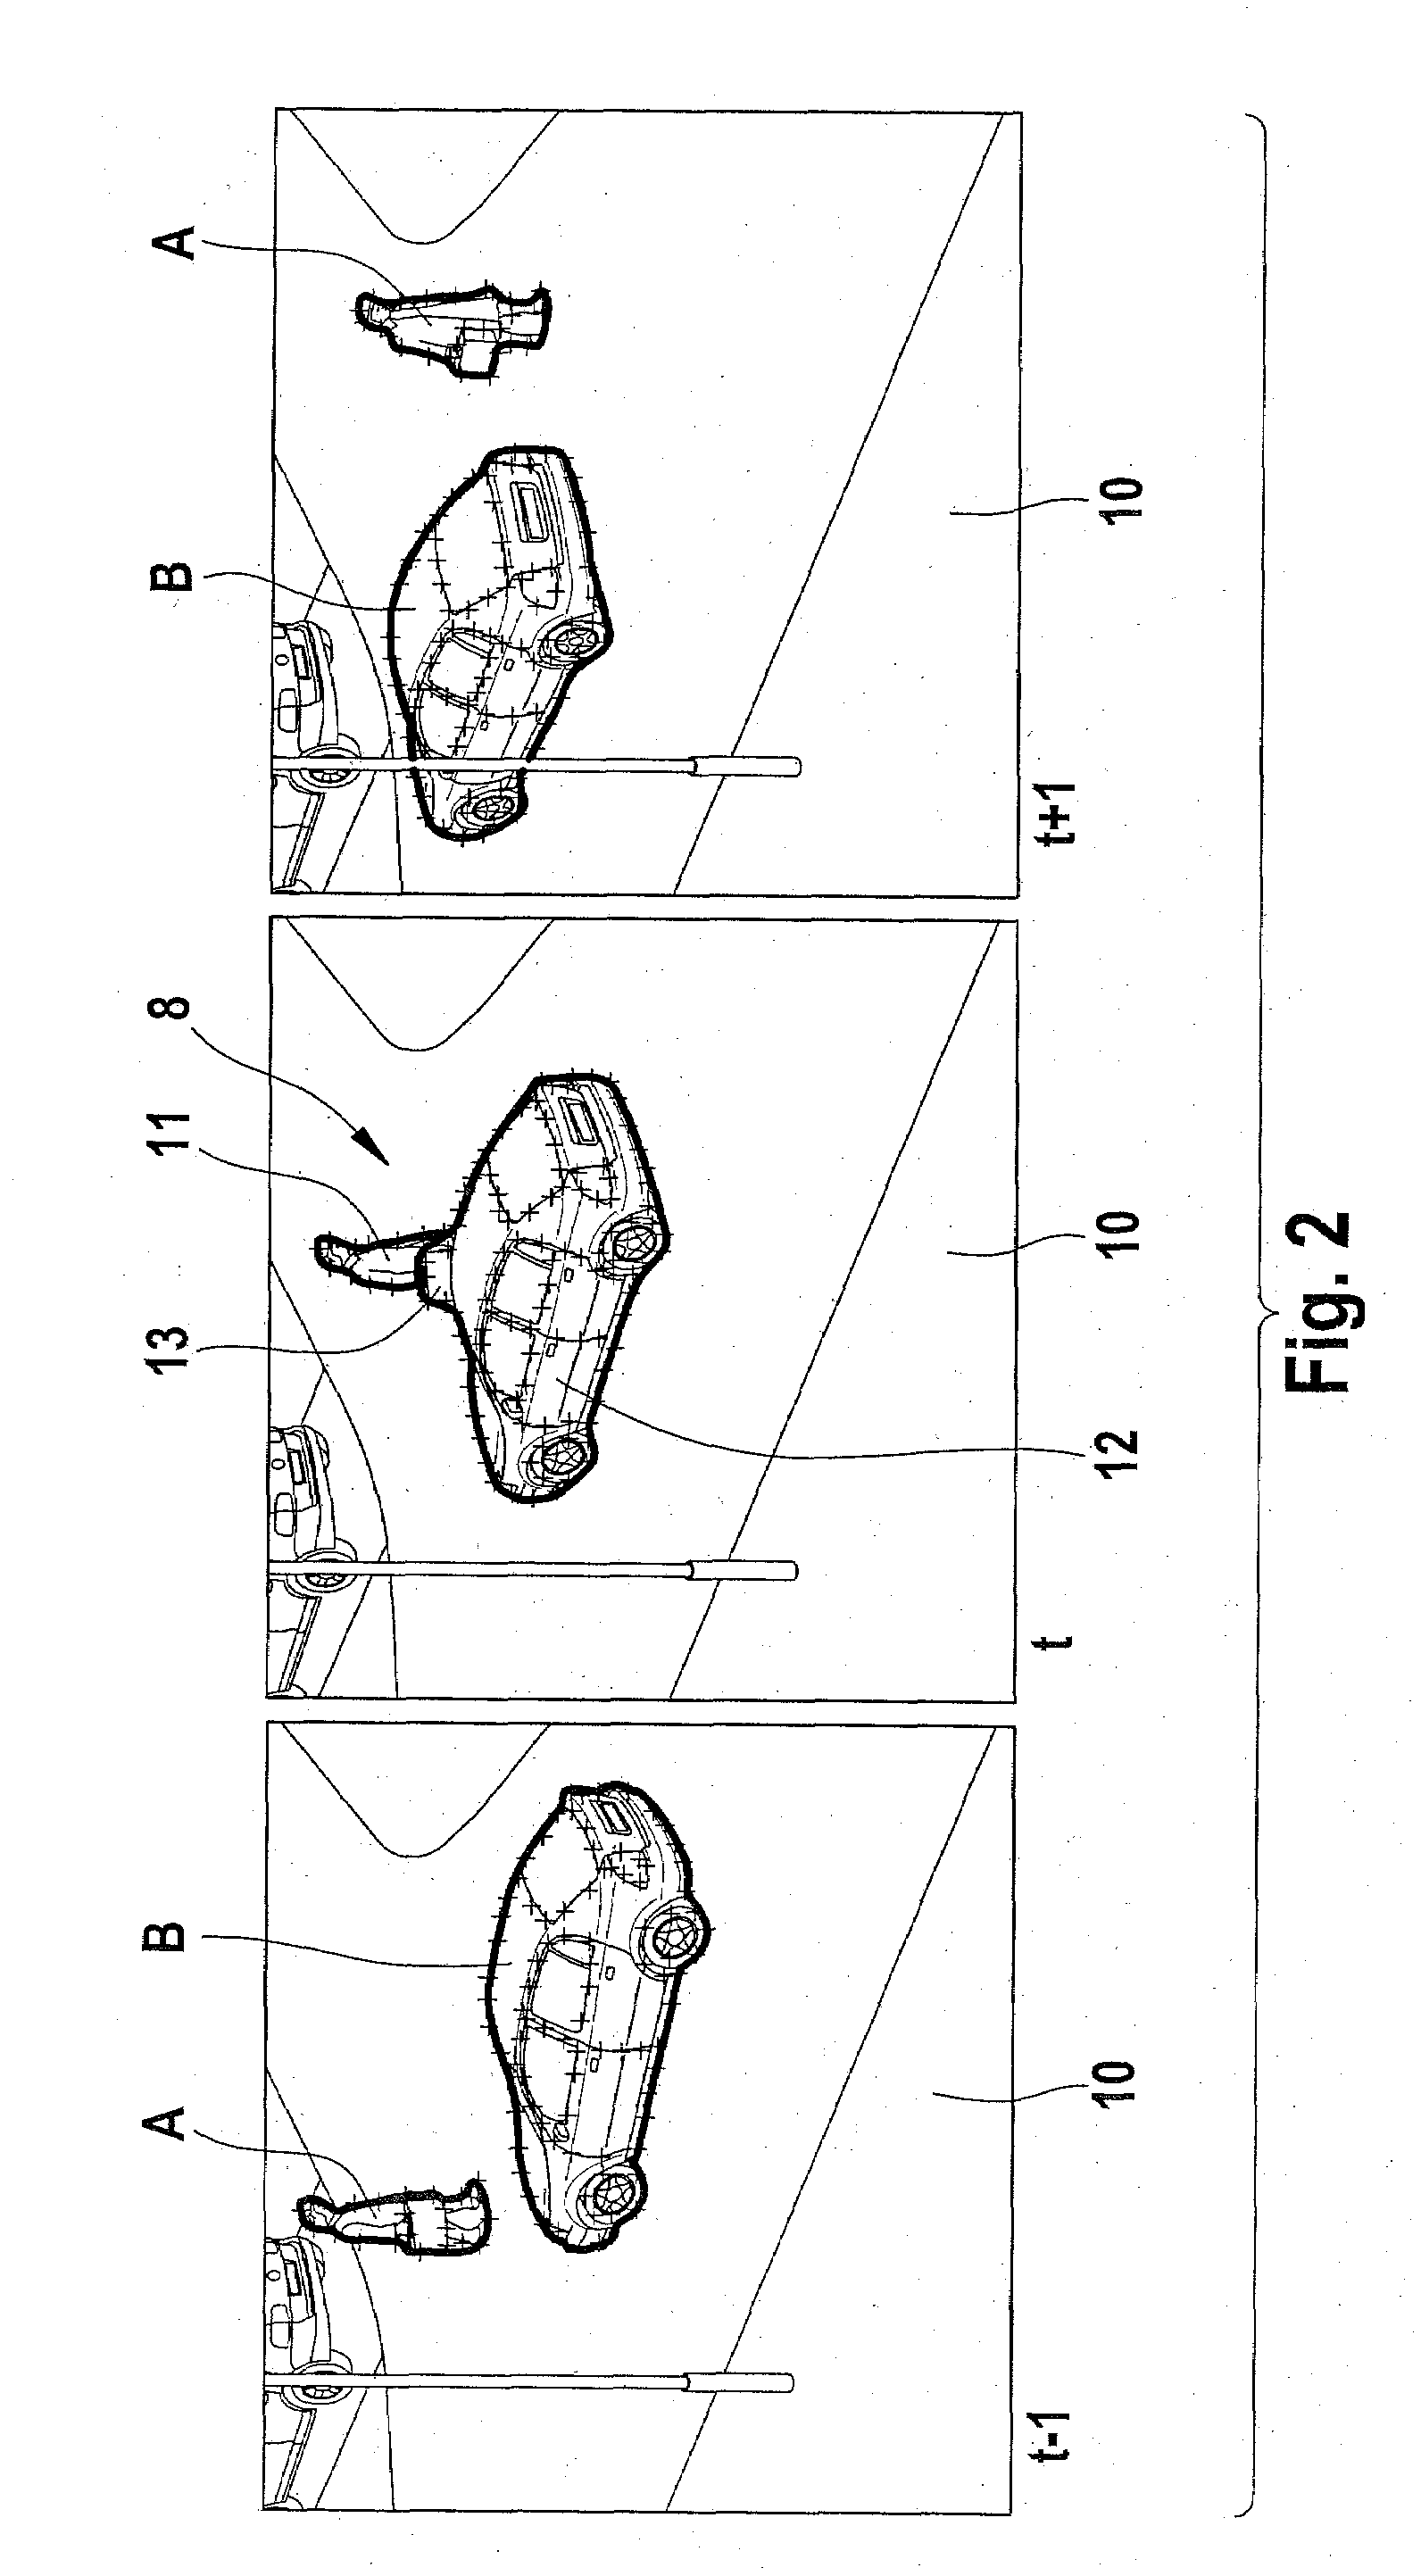 Apparatus, method and computer program for image-based tracking of surveillance objects